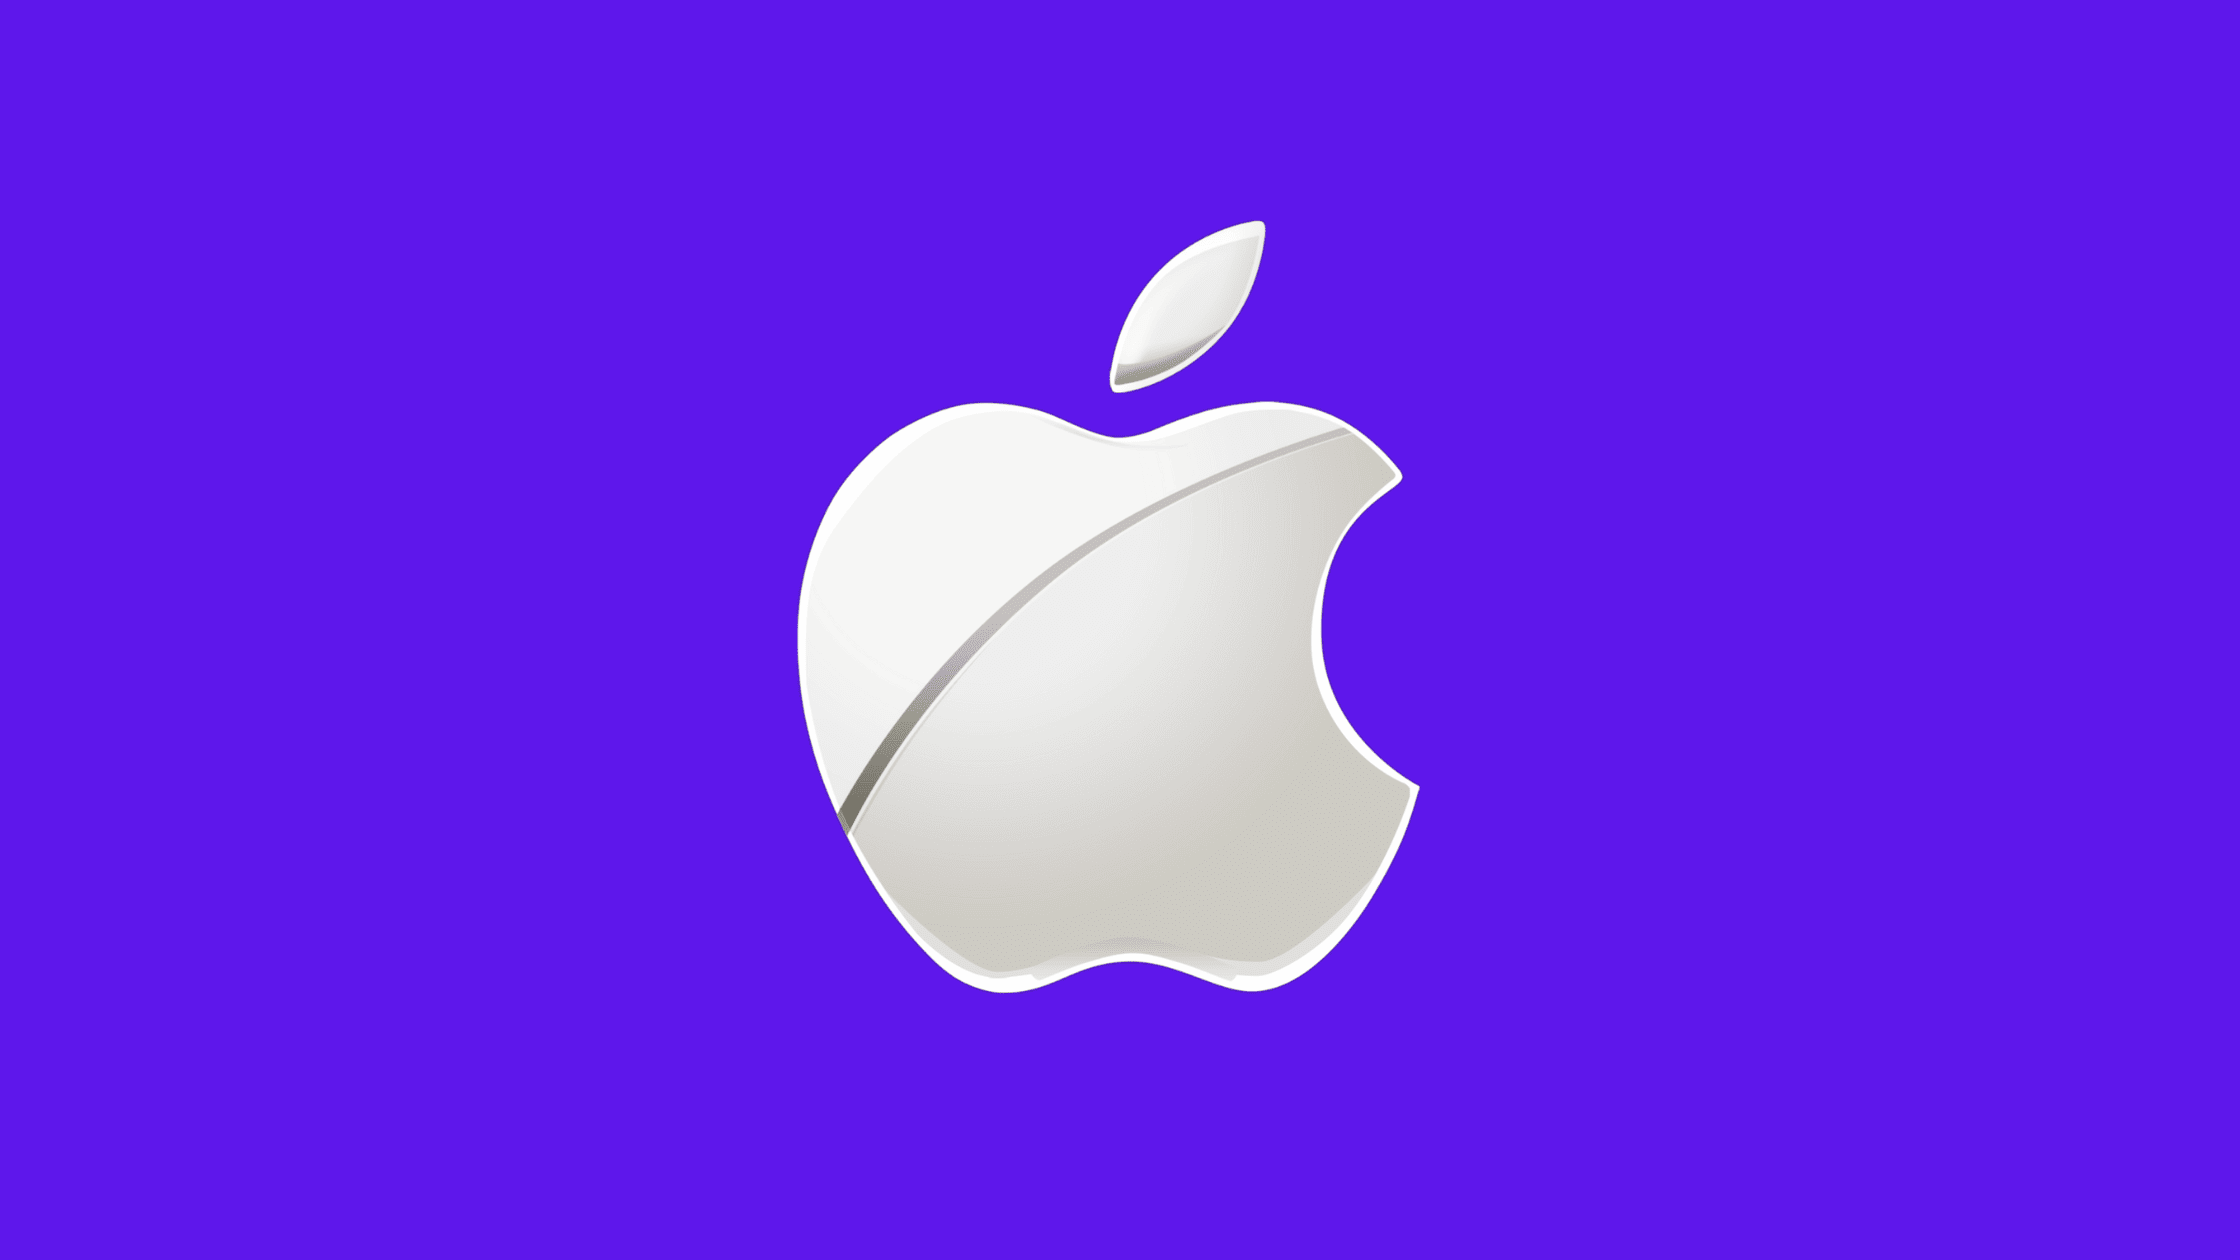 How To Protect Your Apple Devices From The Two 0 Day Ace Vulnerabilities In Ios Ipados Macos And Safari Web Browser